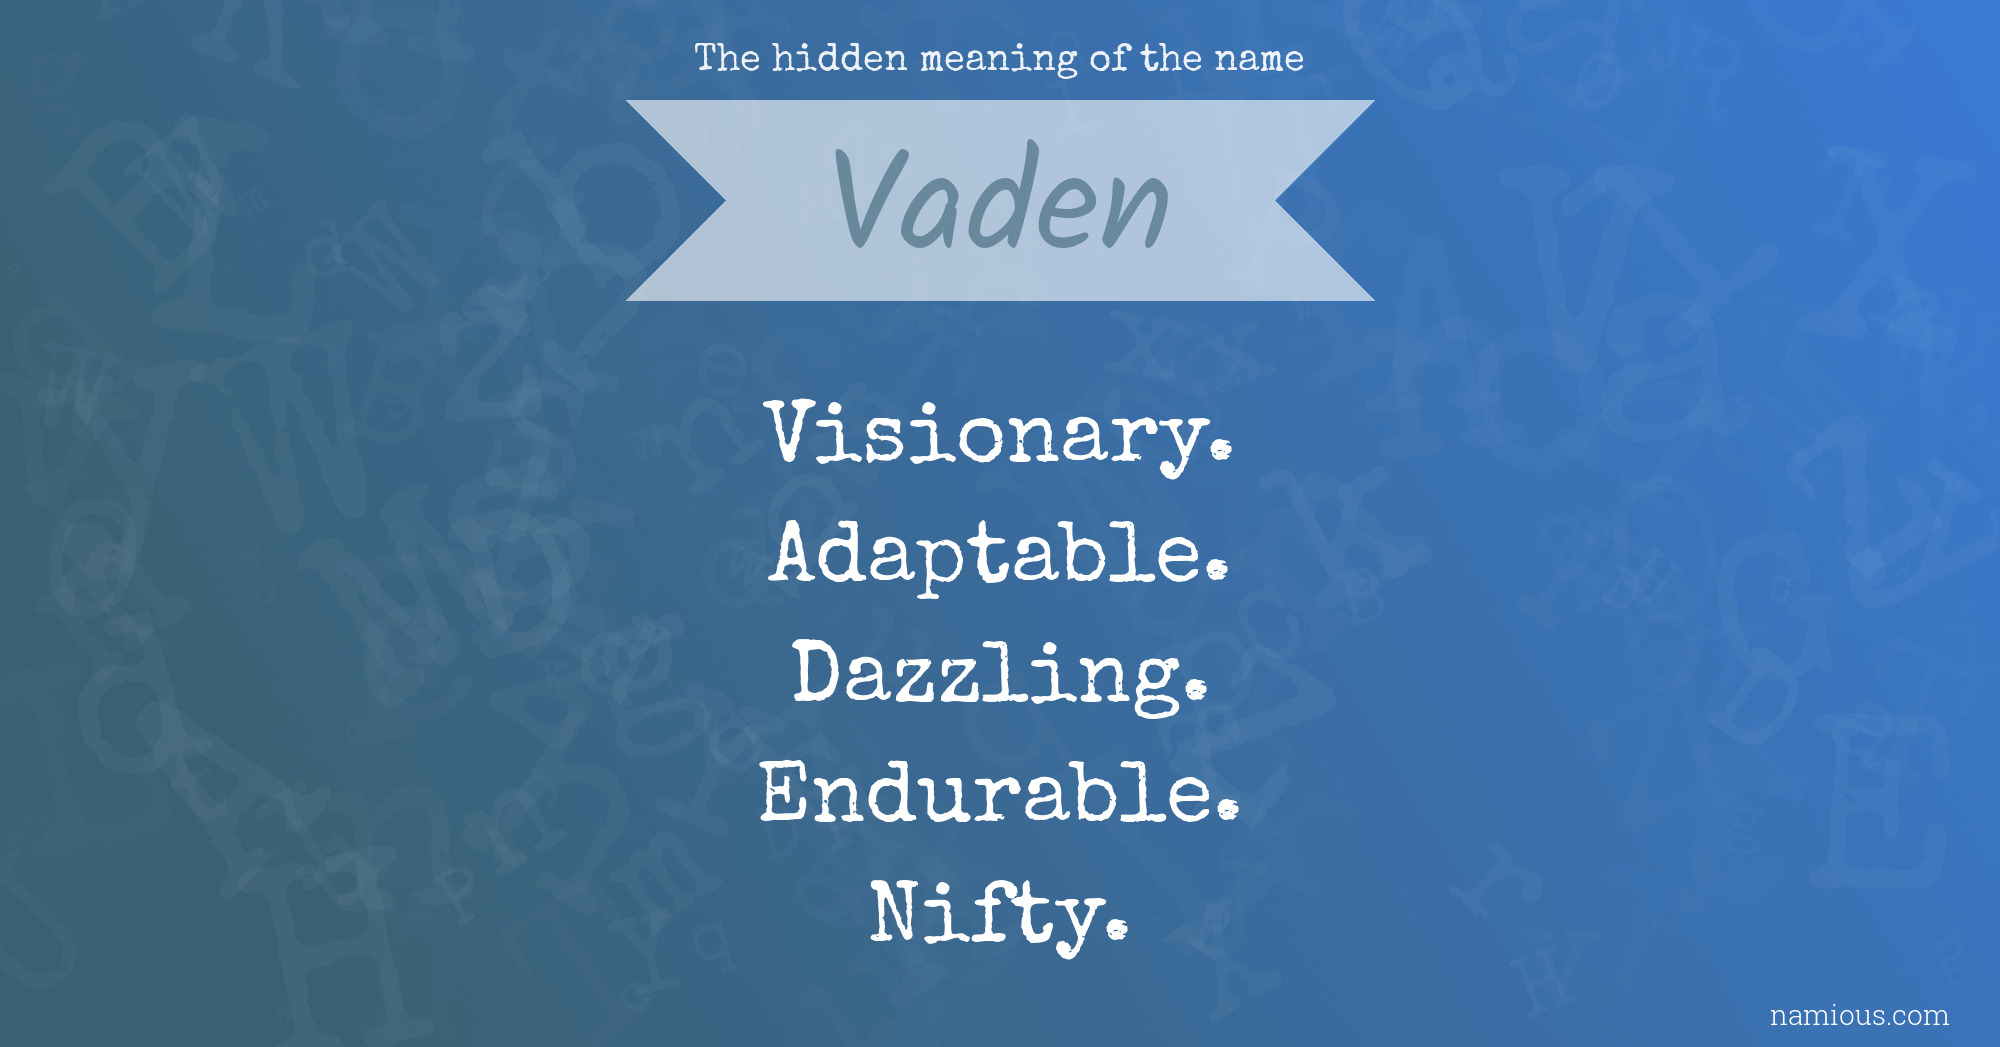 The hidden meaning of the name Vaden